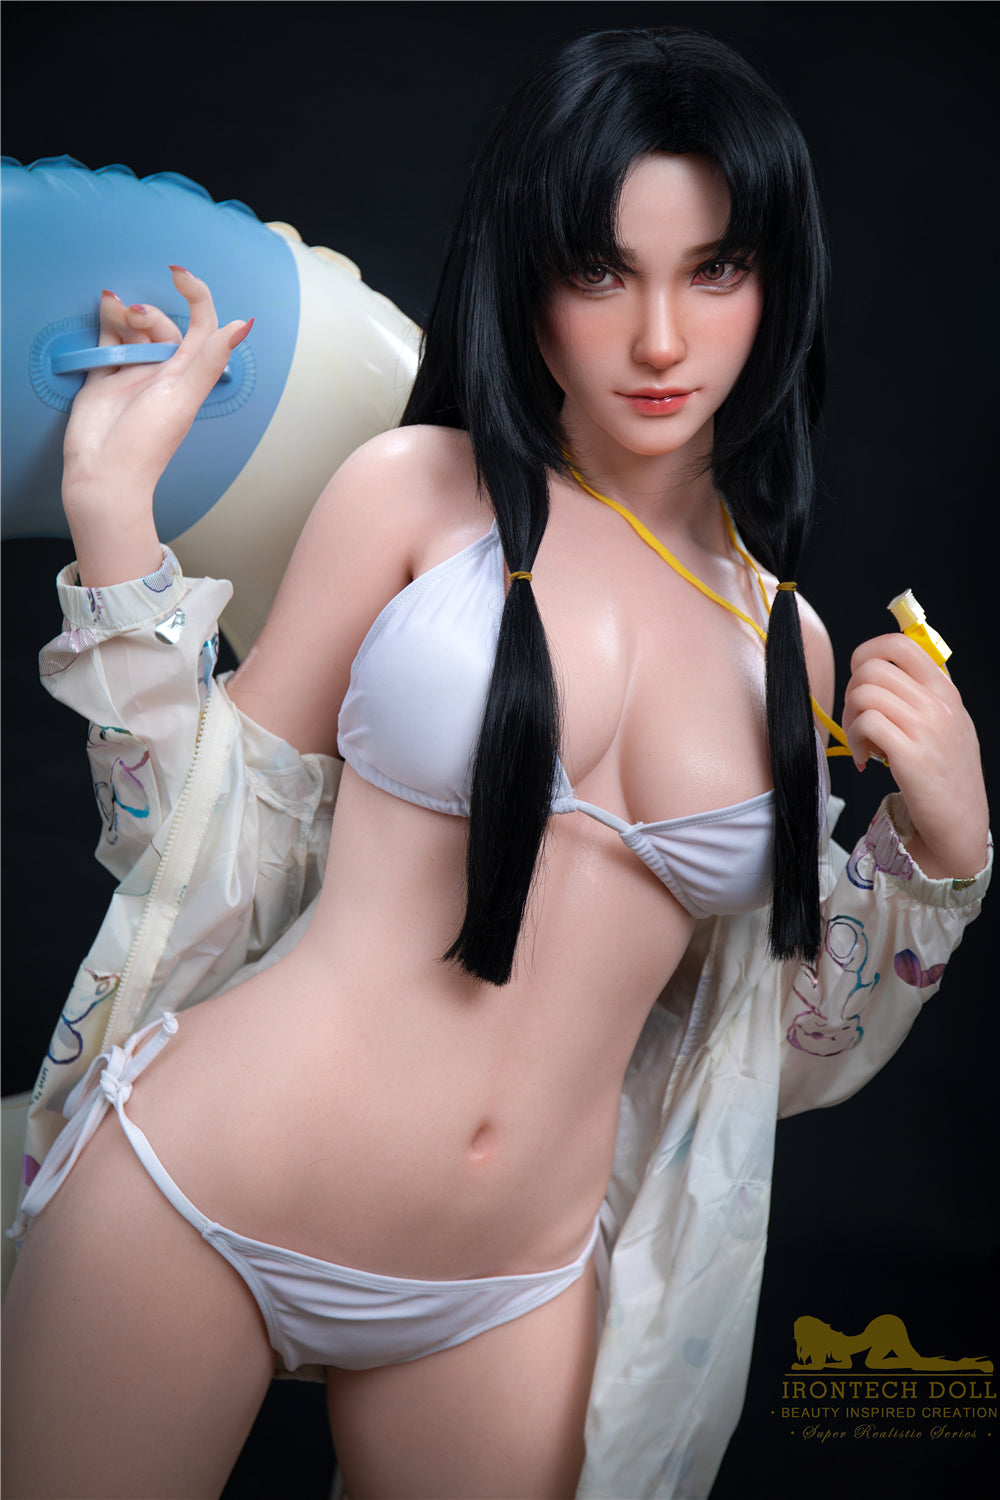 Irontech Doll 166 cm C Silicone - Kitty | Buy Sex Dolls at DOLLS ACTUALLY